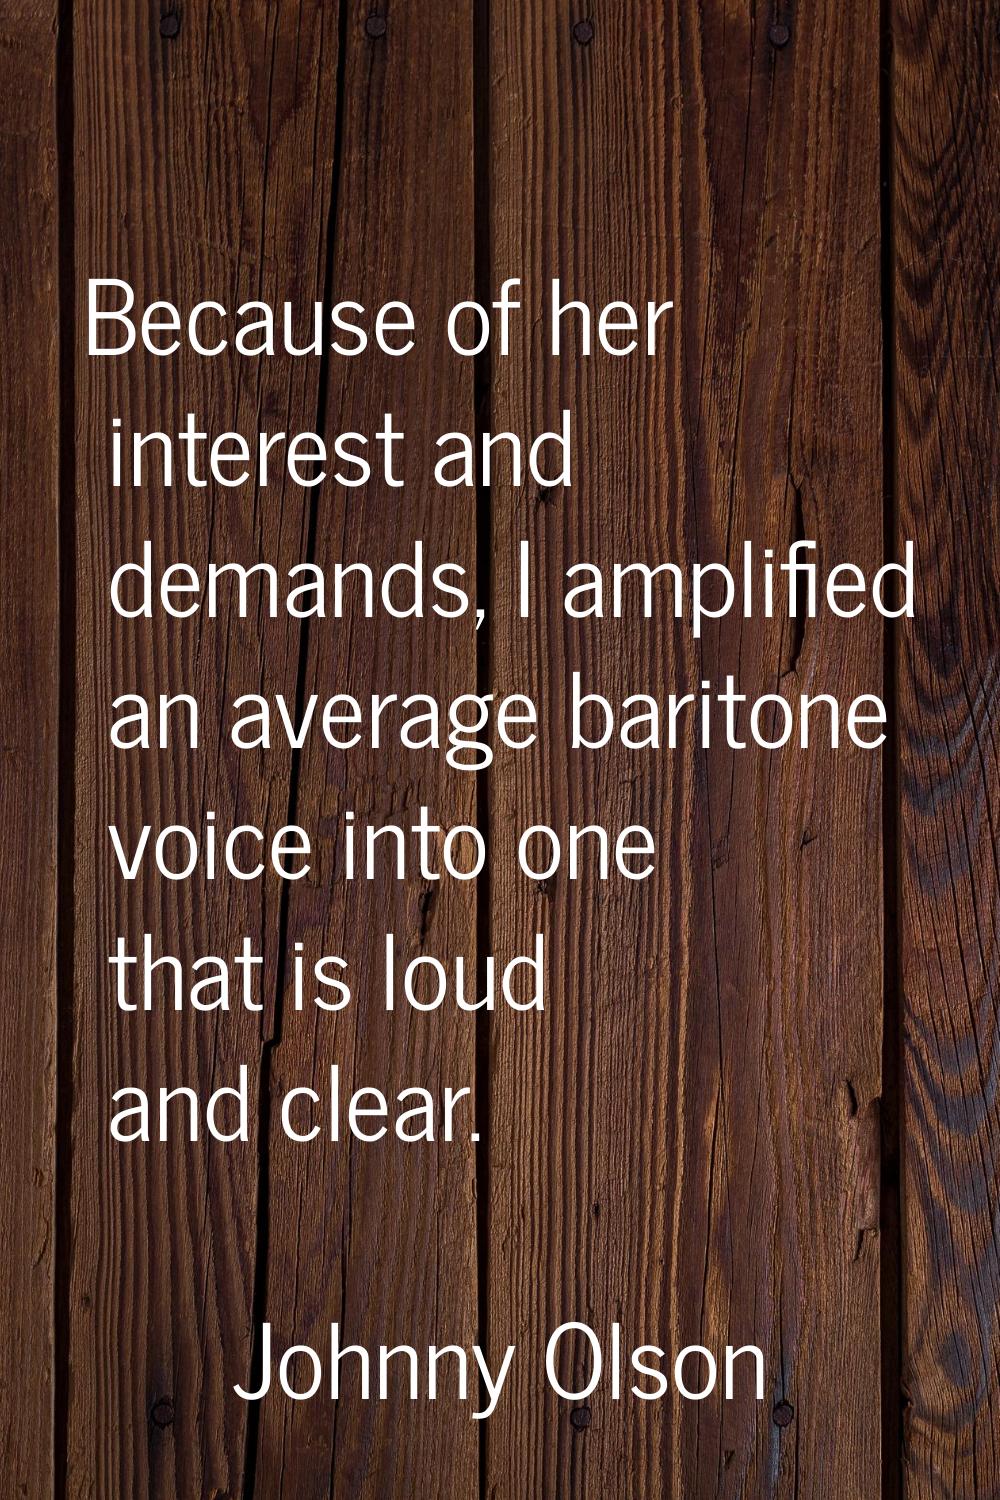 Because of her interest and demands, I amplified an average baritone voice into one that is loud an